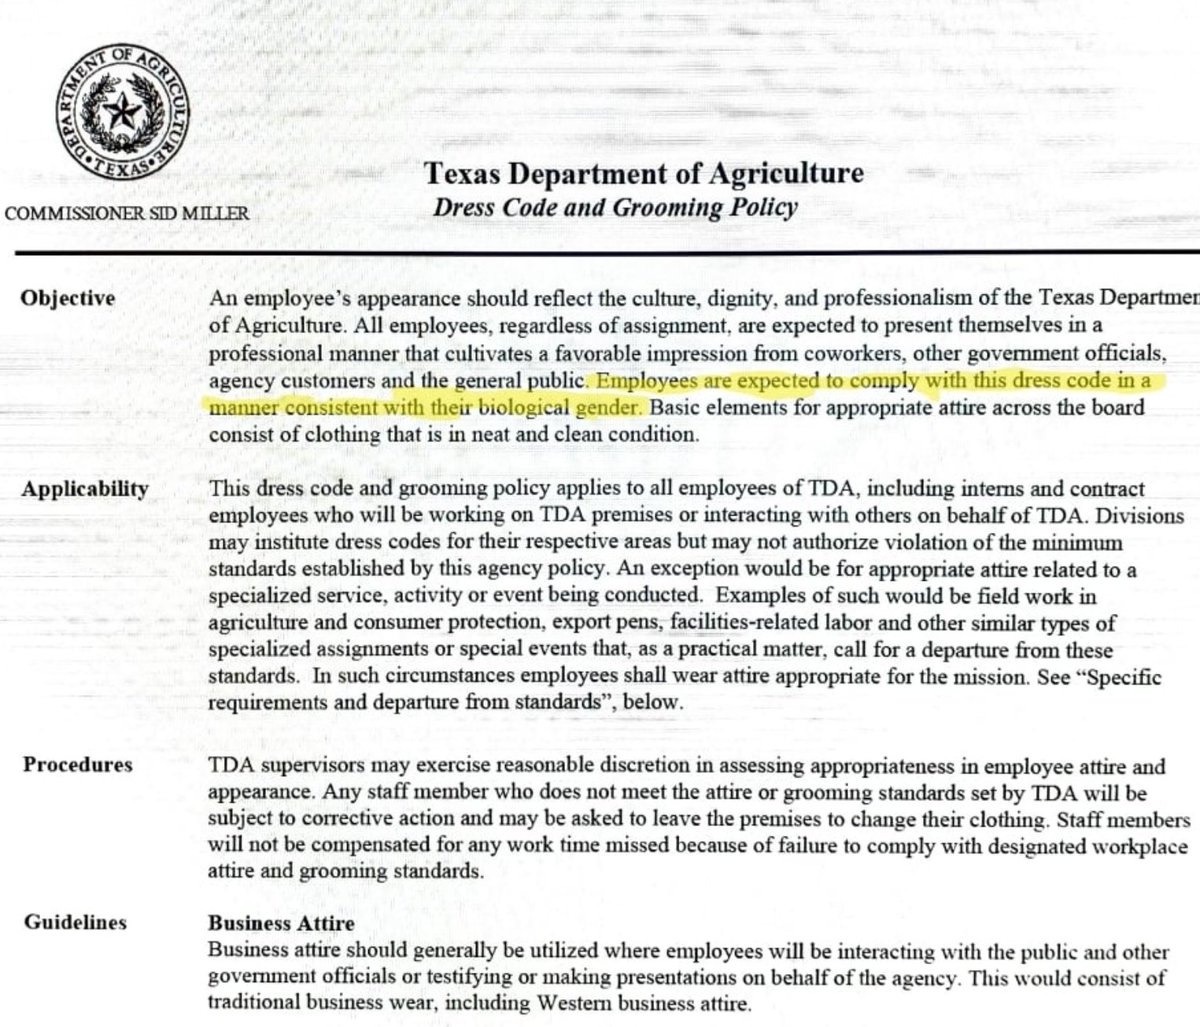 In a clearly unconstitutional move, the Texas Department of Agriculture has sent out a directive that 'all employees must dress in a matter consistent with their biological gender.' They are trying to bring back 3 articles of clothing laws and trying to overturn Bostock.